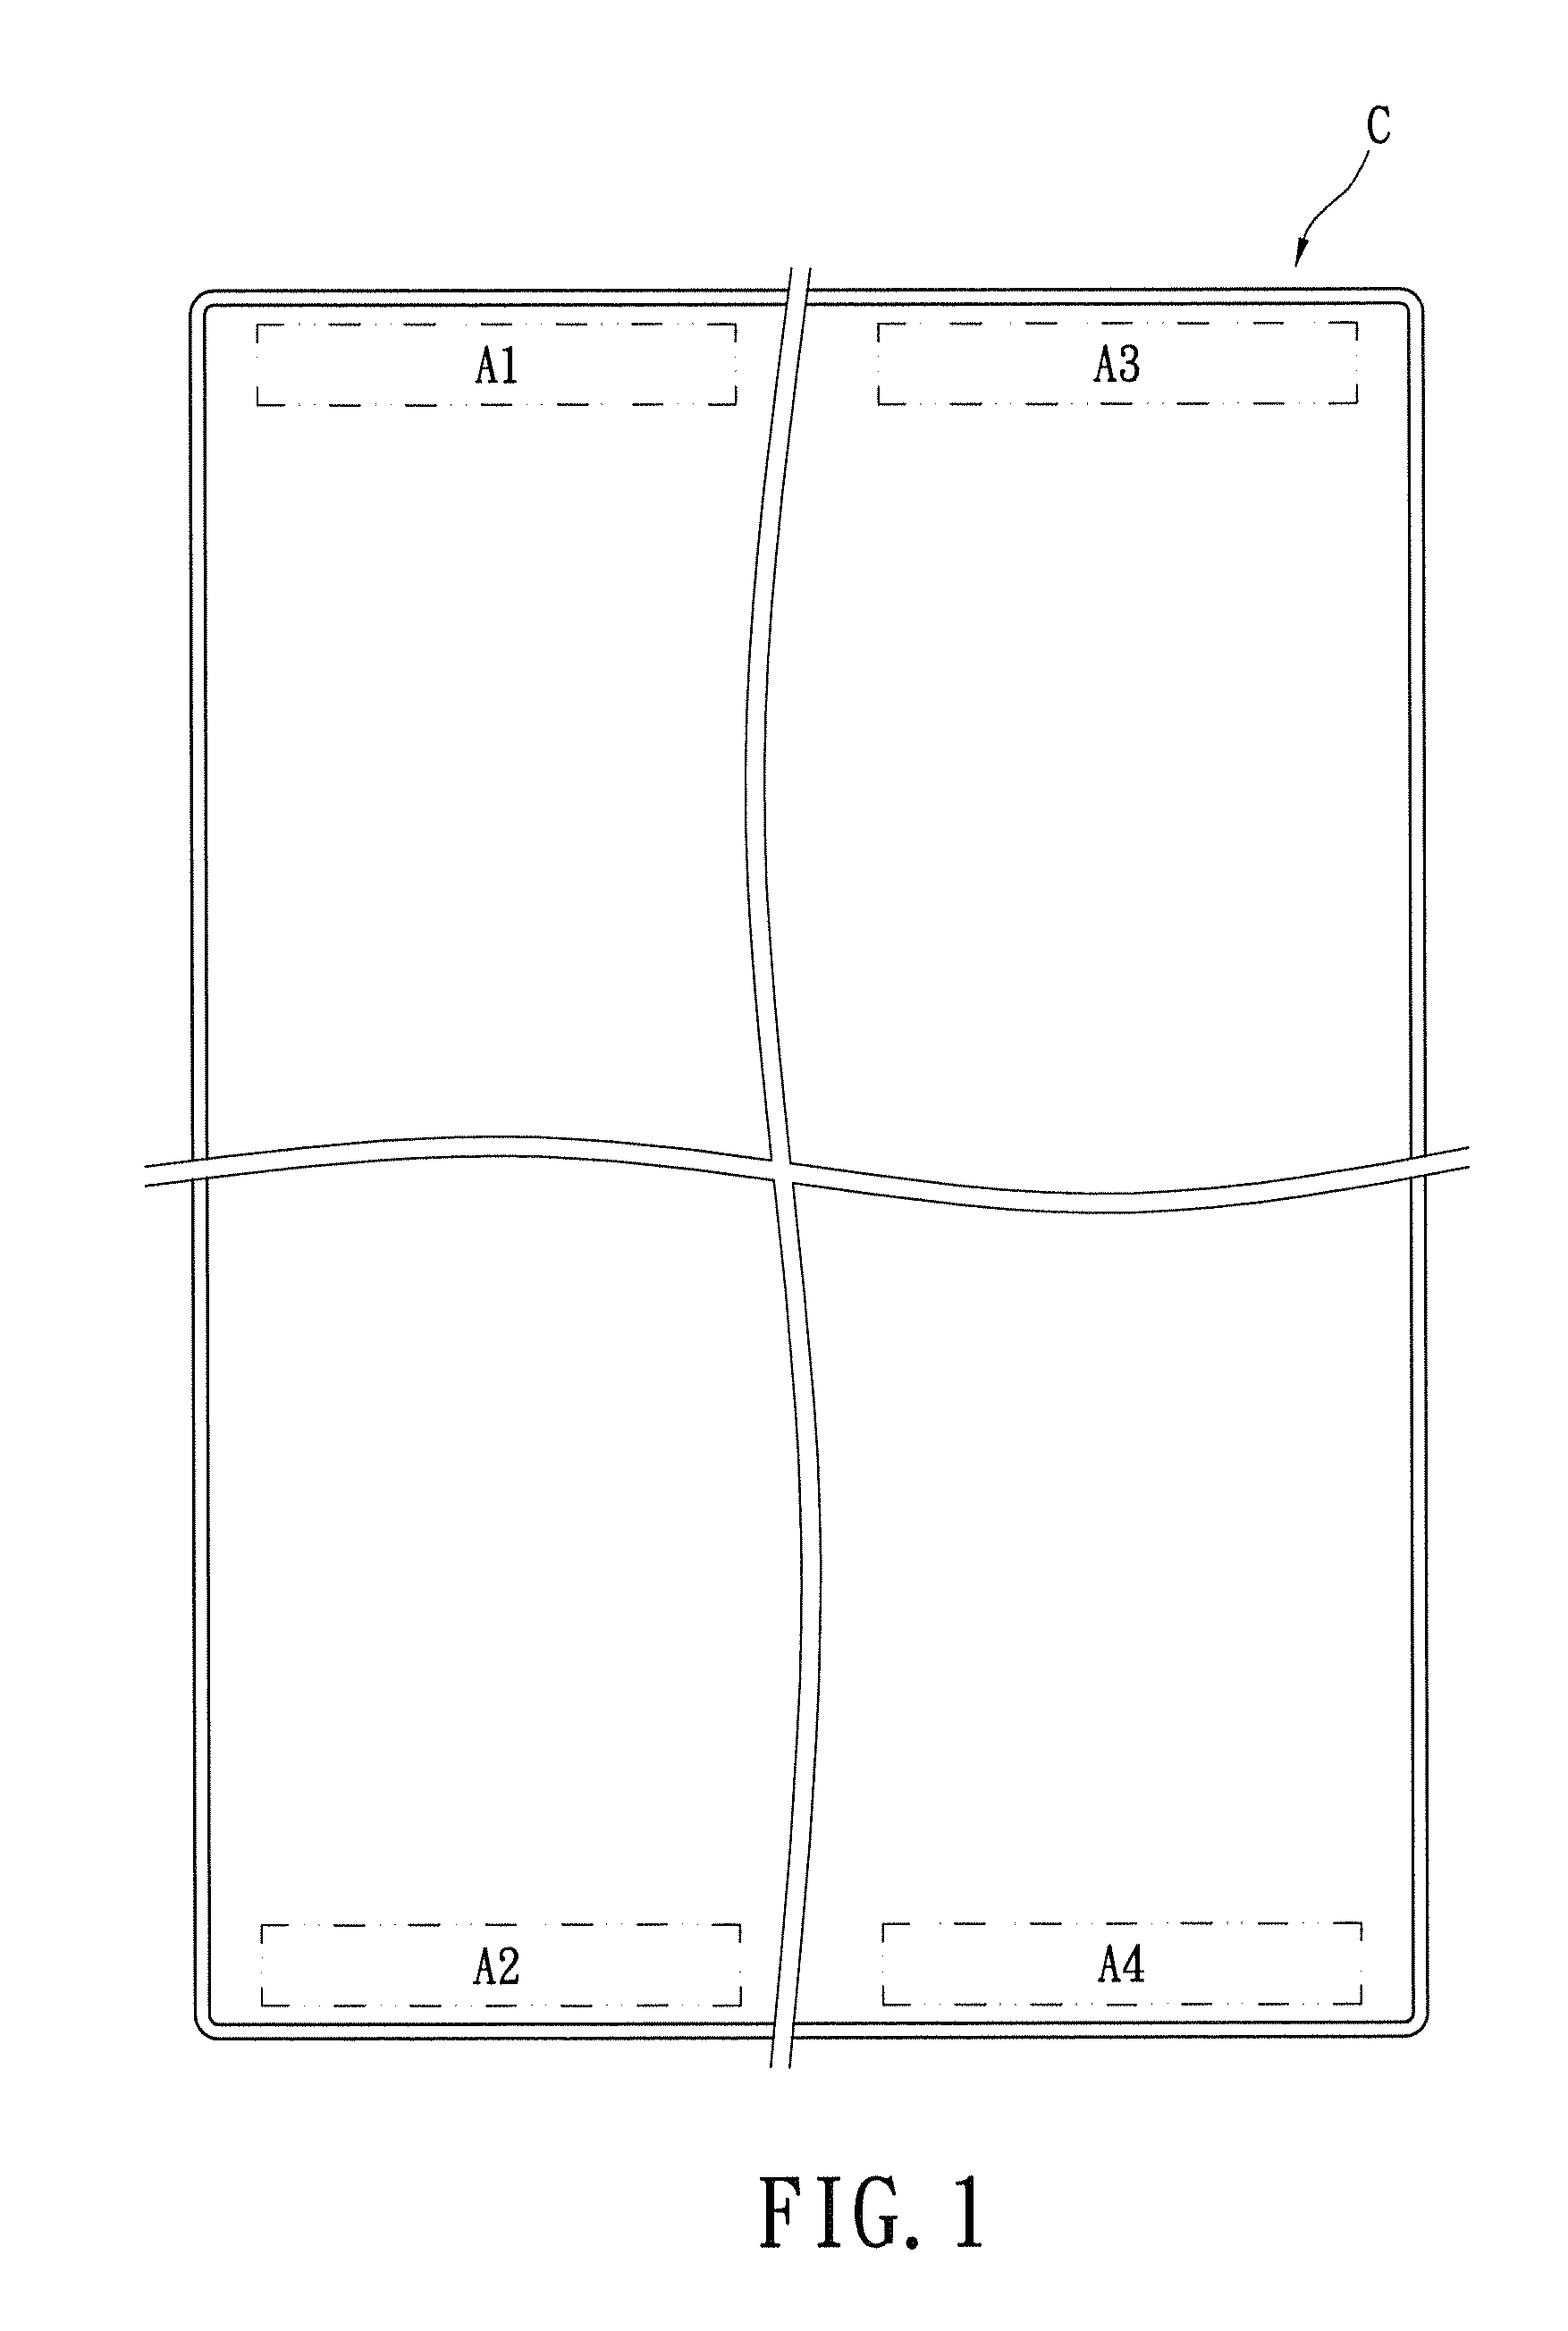 Antenna structure for reducing the SAR value